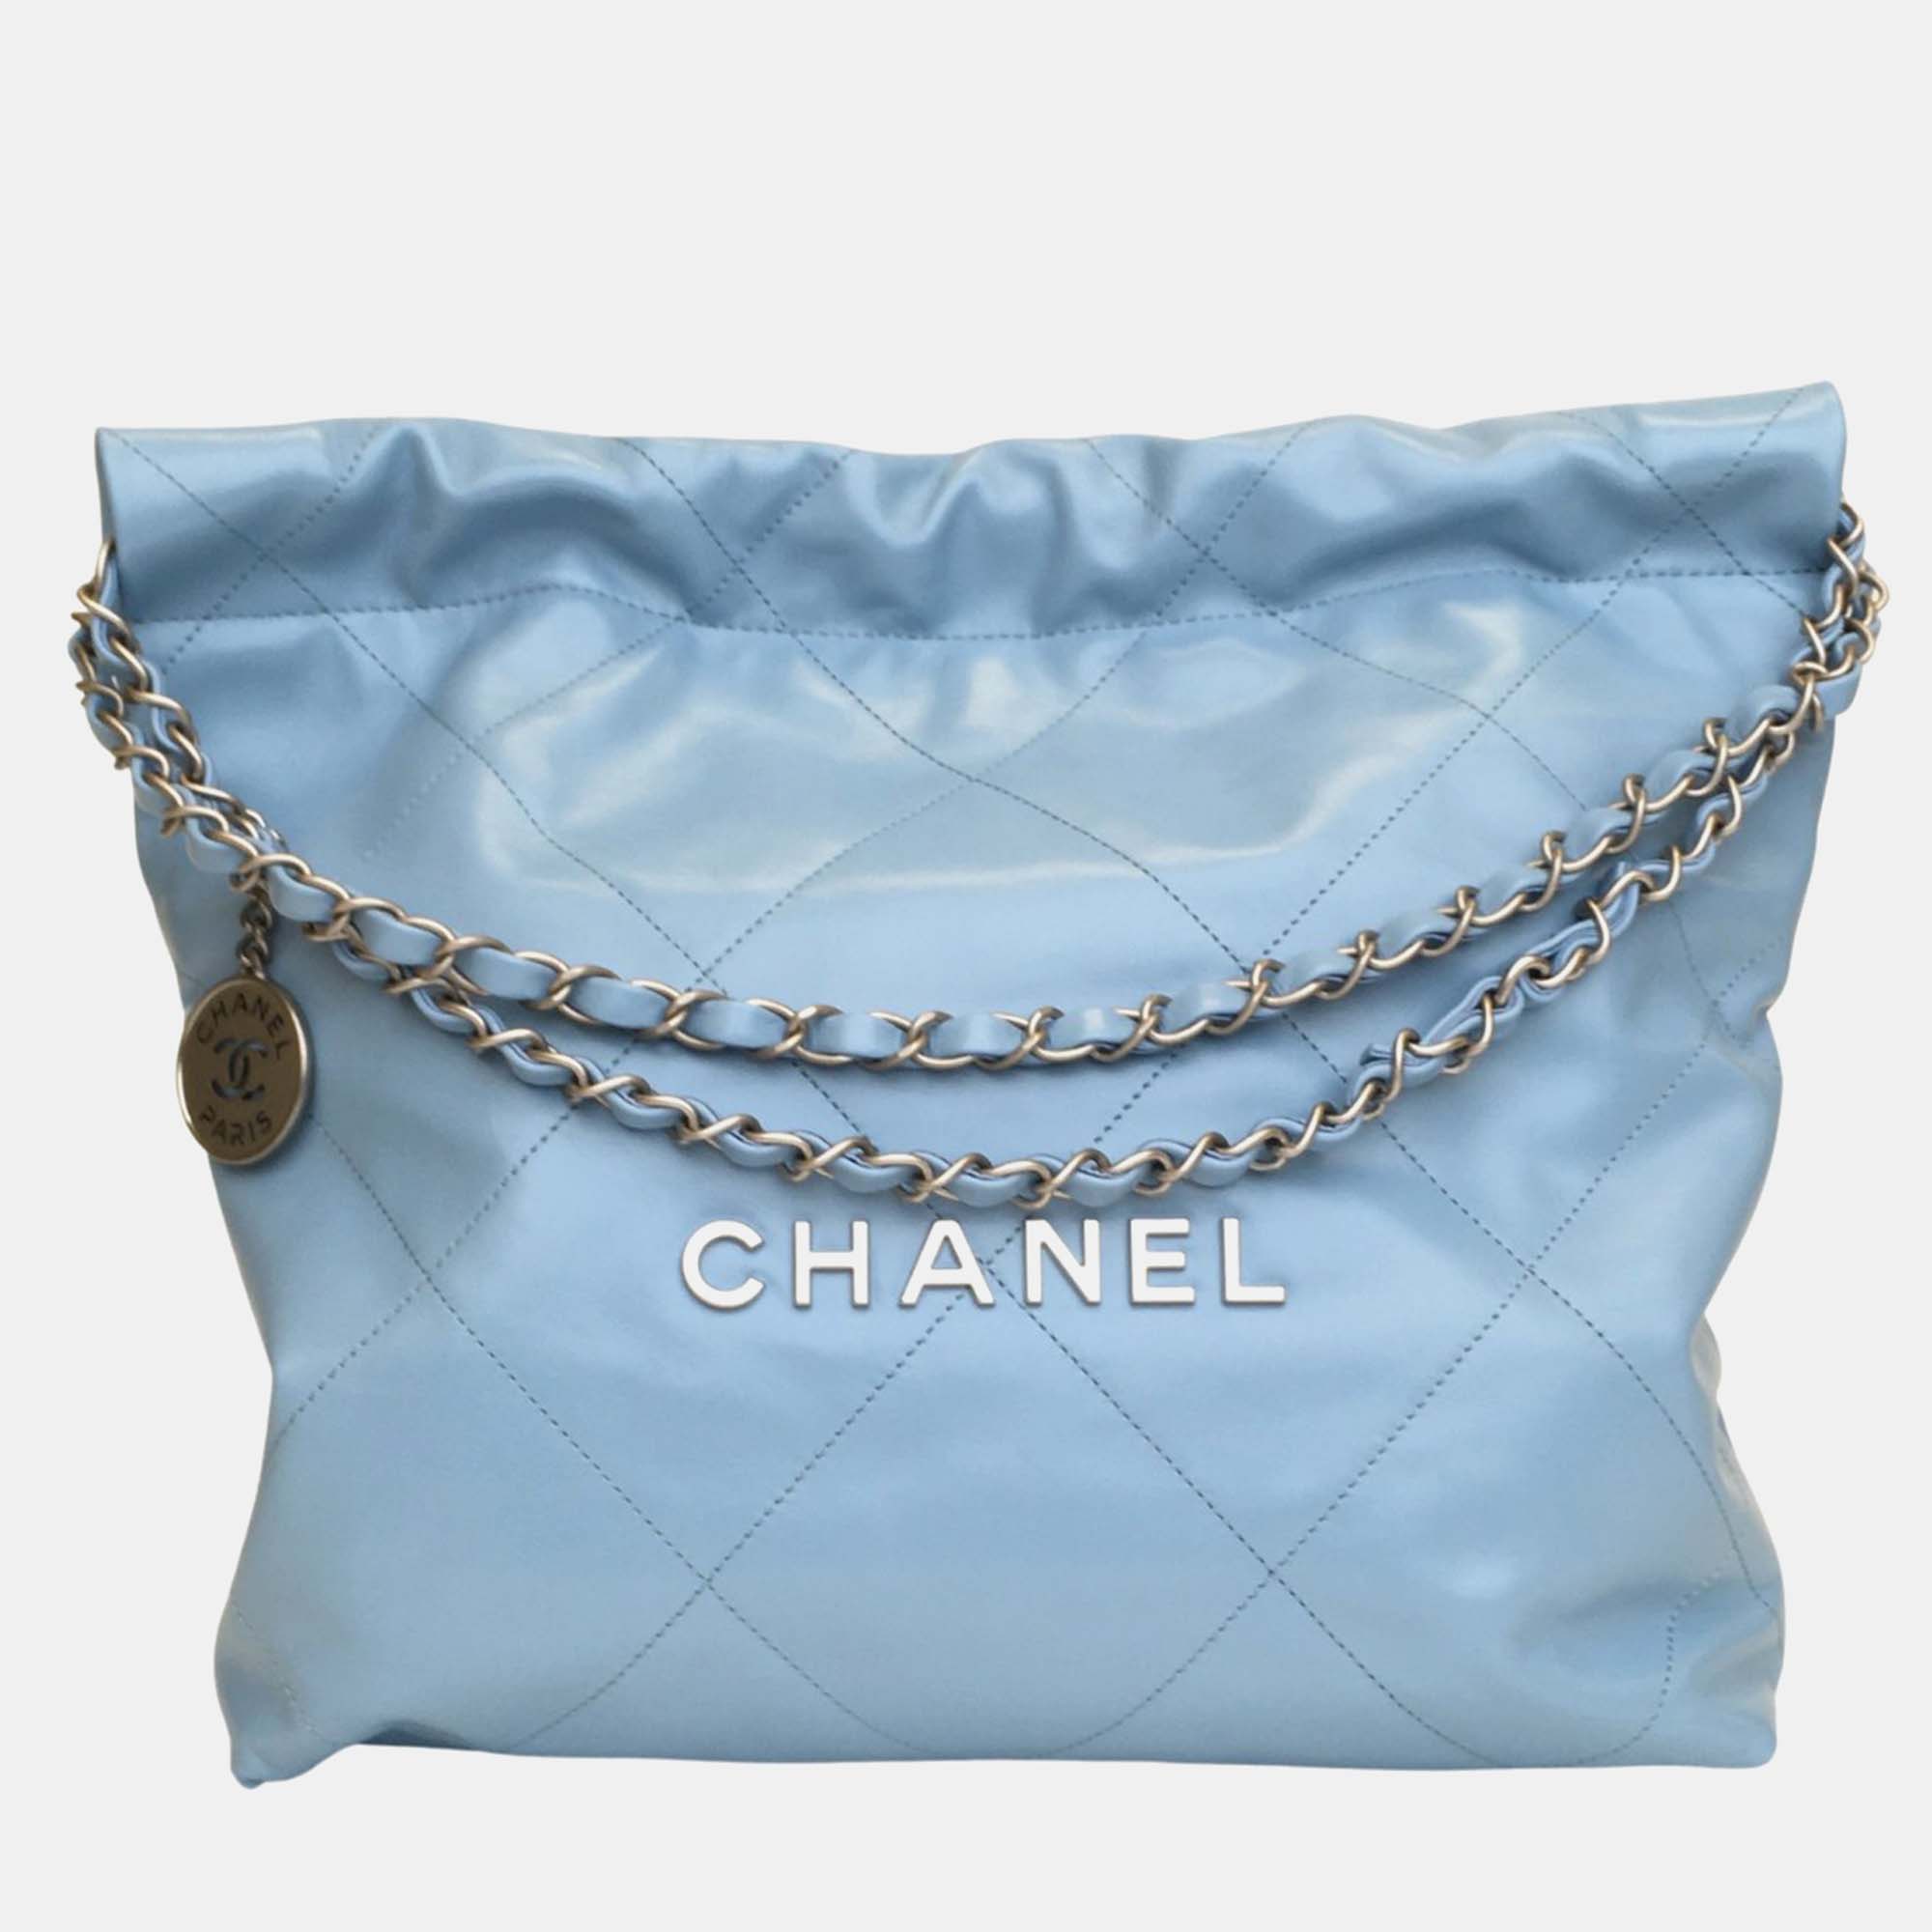 Chanel blue leather small 22 hobo bag